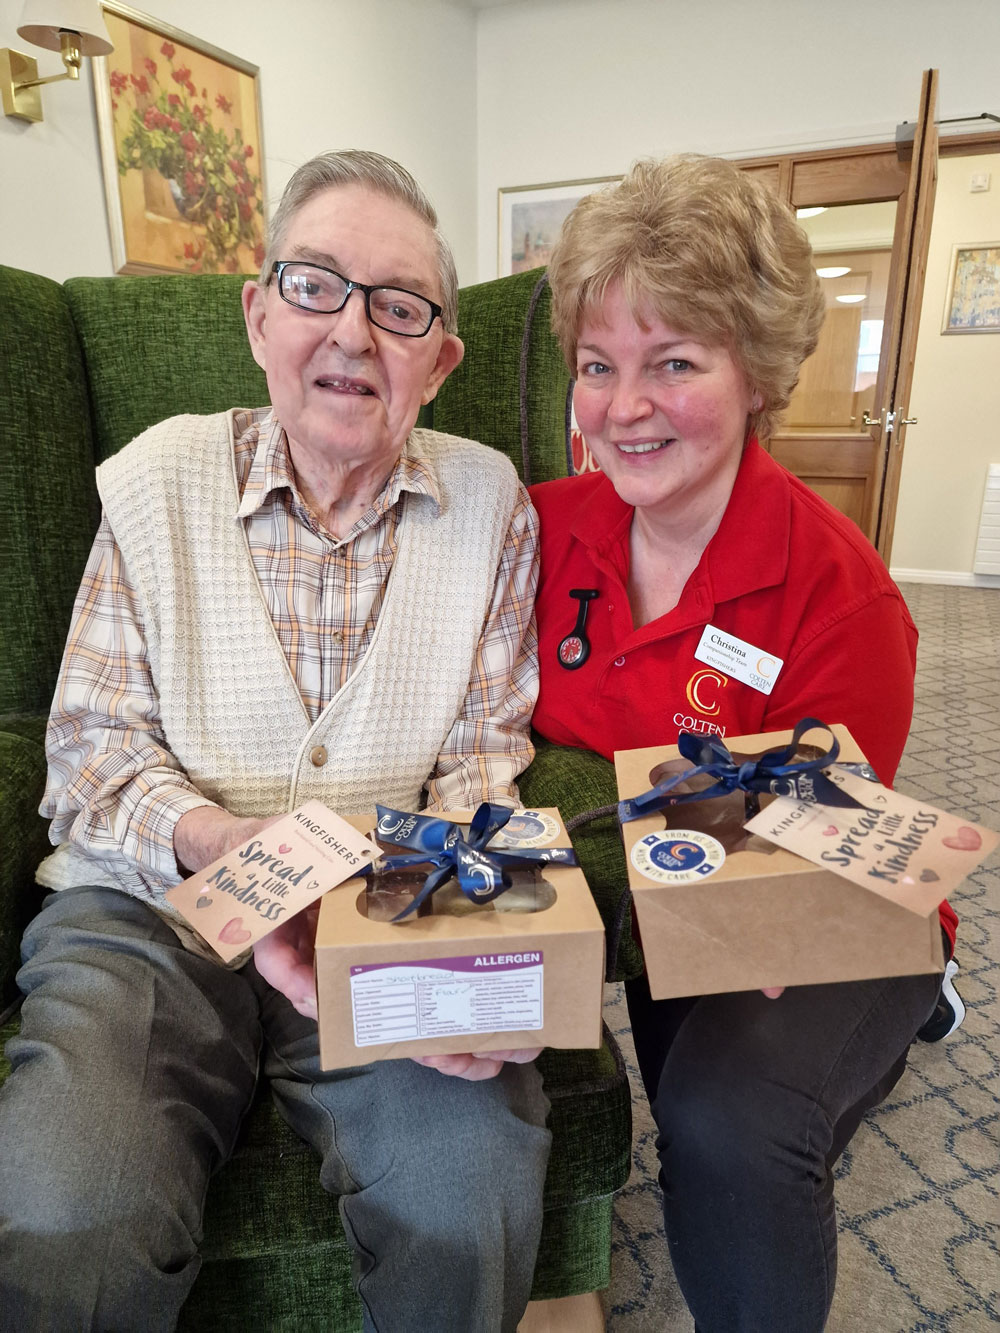 With shortbread gifts at Kingfishers in New Milton are resident Terry Vass and Companionship Team member Christina Holliday.